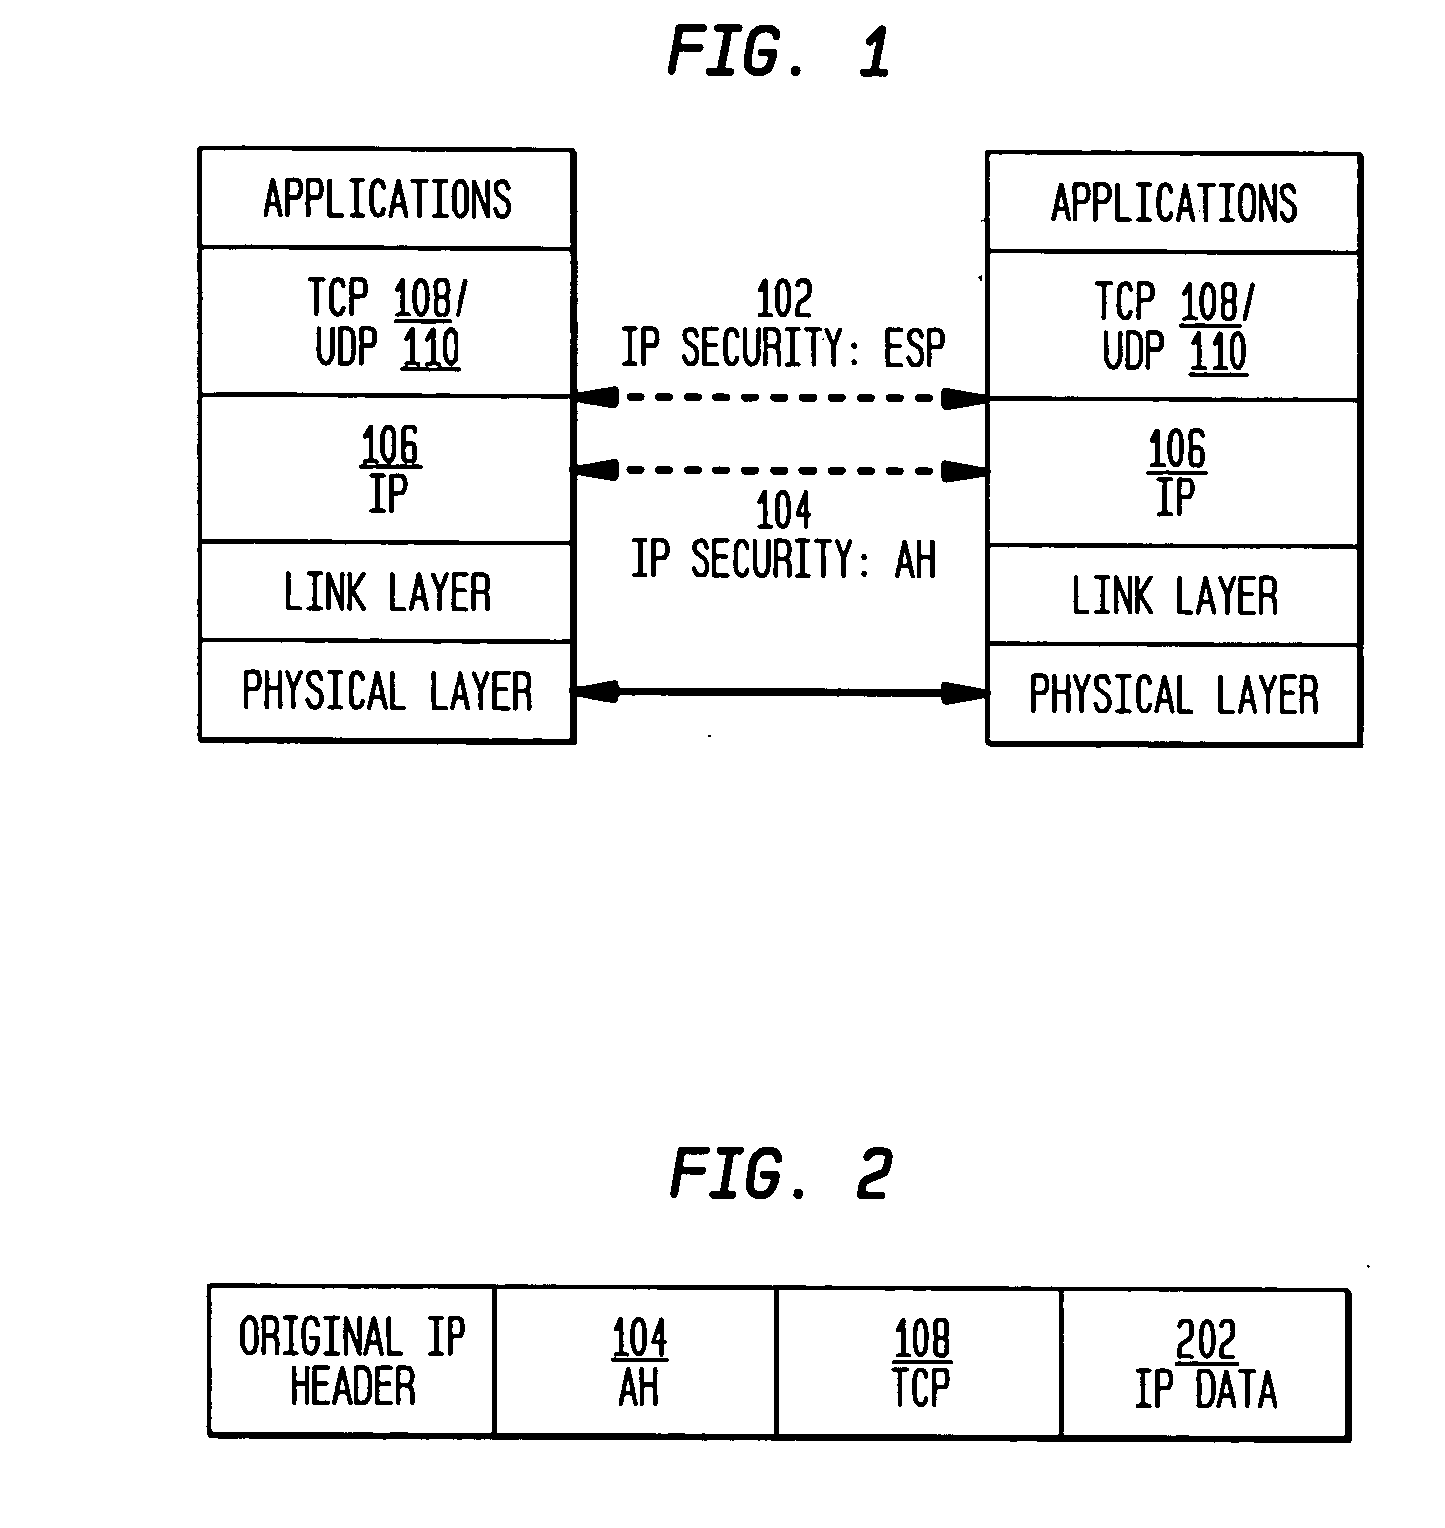 Authentication mechanisms for call control message integrity and origin verification